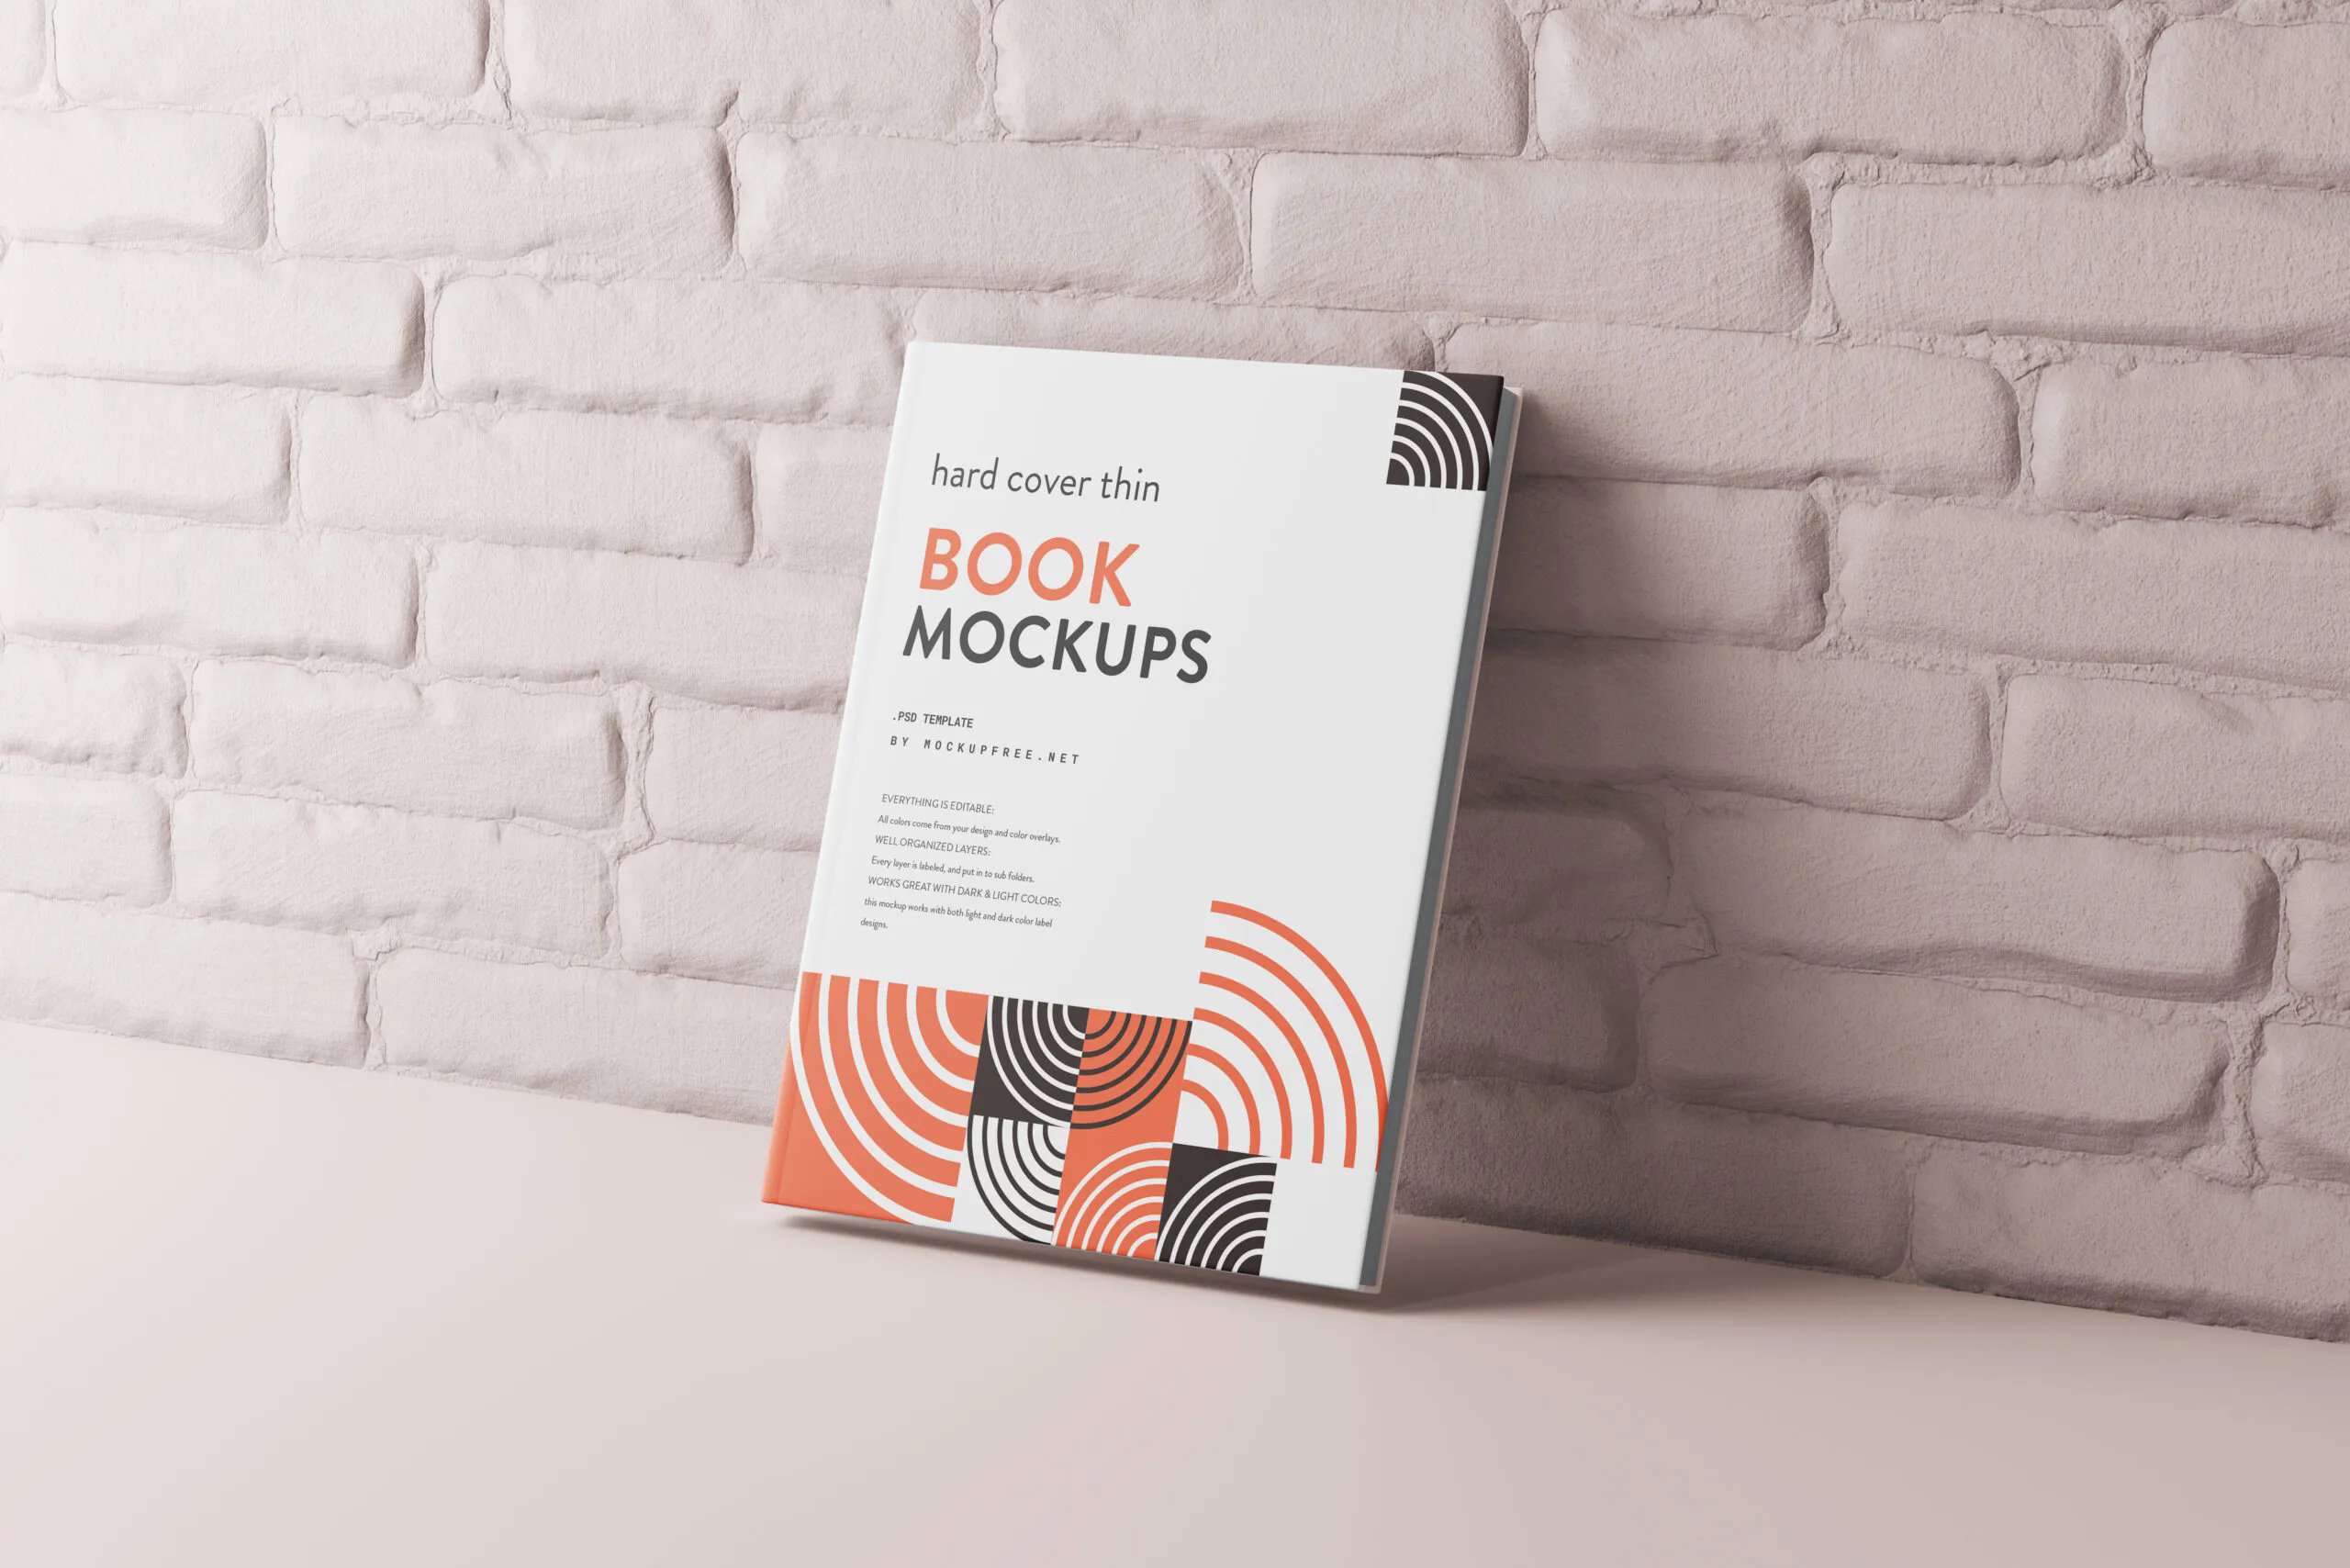 5 Mockups of Thin Hardcover Books in Perspective Views FREE PSD